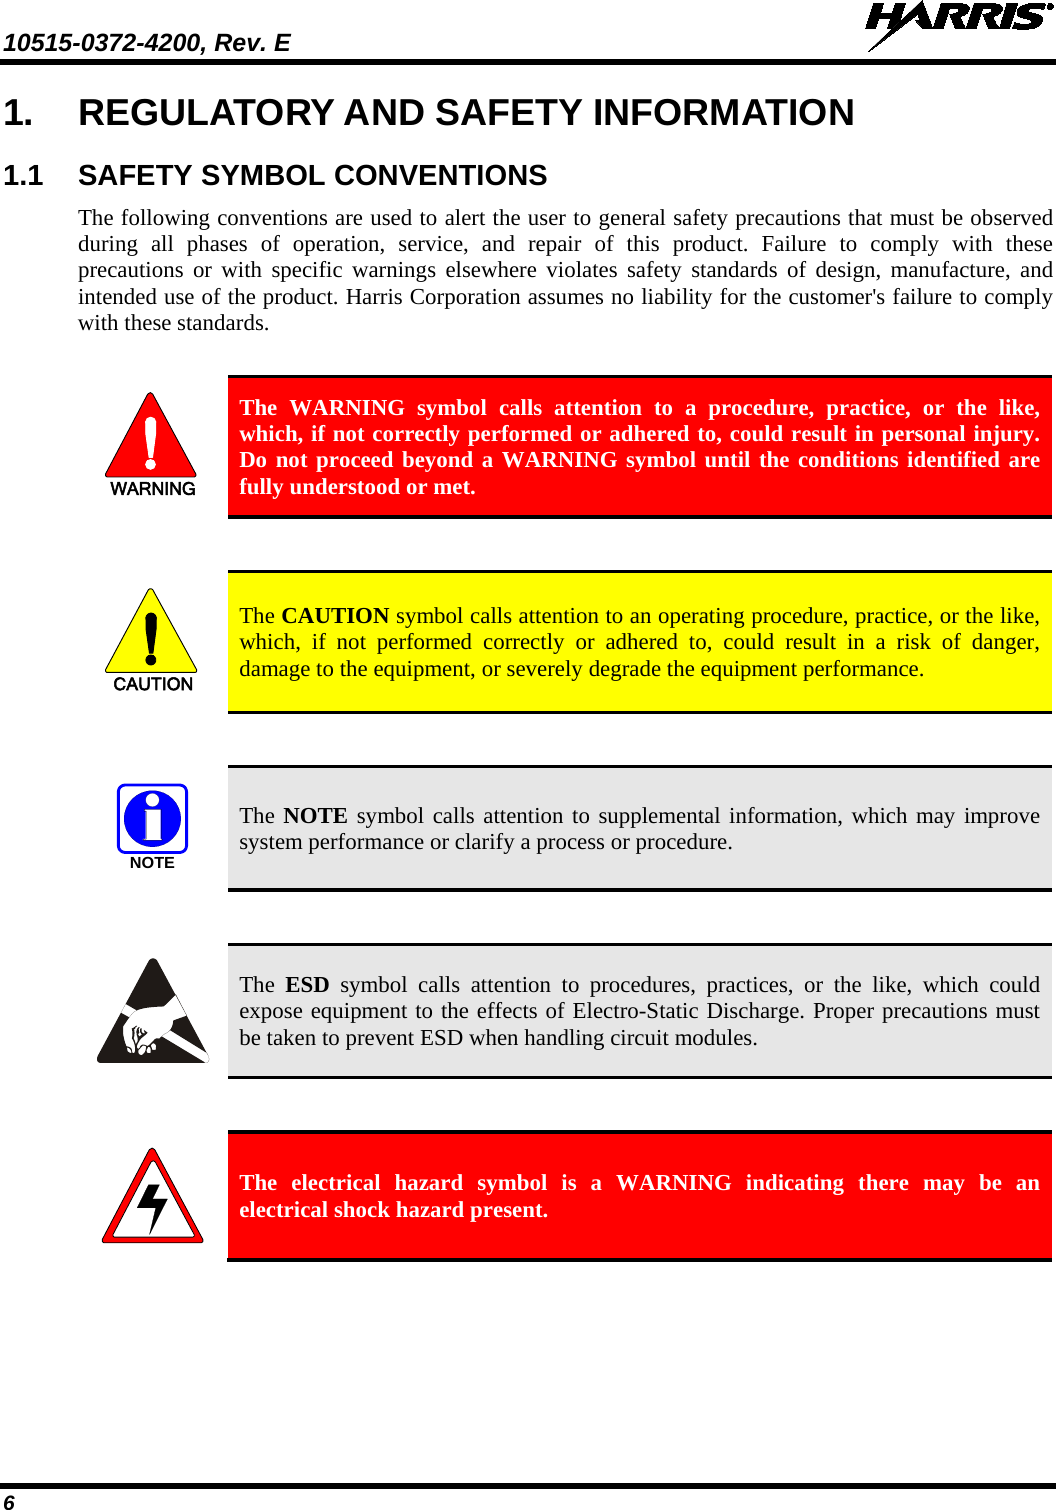 10515-0372-4200, Rev. E   6 1. REGULATORY AND SAFETY INFORMATION 1.1 SAFETY SYMBOL CONVENTIONS The following conventions are used to alert the user to general safety precautions that must be observed during all phases of operation, service, and repair of this product. Failure to comply with these precautions or with specific warnings elsewhere violates safety standards of design, manufacture, and intended use of the product. Harris Corporation assumes no liability for the customer&apos;s failure to comply with these standards.  WARNING The WARNING symbol calls attention to a procedure, practice, or the like, which, if not correctly performed or adhered to, could result in personal injury.  Do not proceed beyond a WARNING symbol until the conditions identified are fully understood or met.    CAUTION The CAUTION symbol calls attention to an operating procedure, practice, or the like, which, if not performed correctly or adhered to, could result in a risk of danger, damage to the equipment, or severely degrade the equipment performance.   NOTE The NOTE symbol calls attention to supplemental information, which may improve system performance or clarify a process or procedure.    The  ESD symbol calls attention to procedures, practices, or the like, which could expose equipment to the effects of Electro-Static Discharge. Proper precautions must be taken to prevent ESD when handling circuit modules.    The electrical hazard symbol is a WARNING indicating there may be an electrical shock hazard present. 